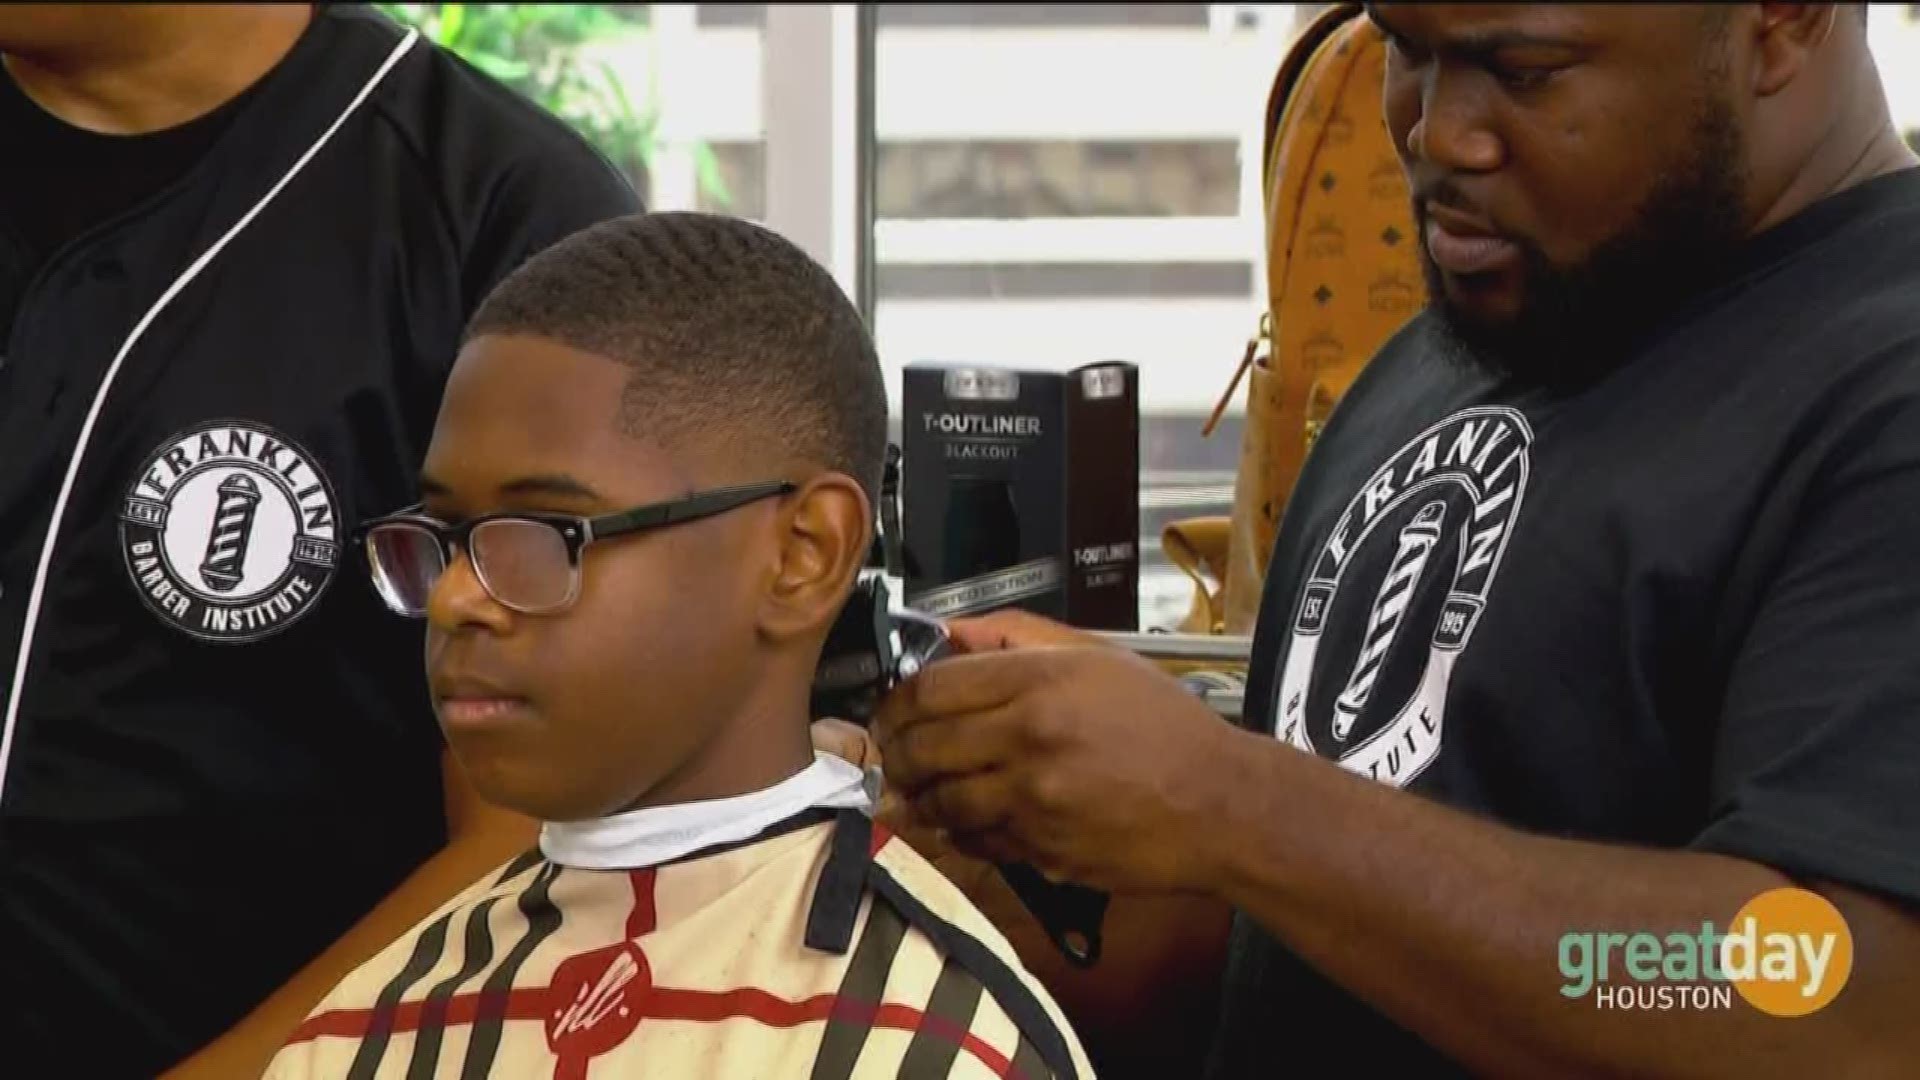 Franklin Barber &amp; Beauty Institute is teaming up with the non-profit "You Are A Queen" to give back-to-school haircuts